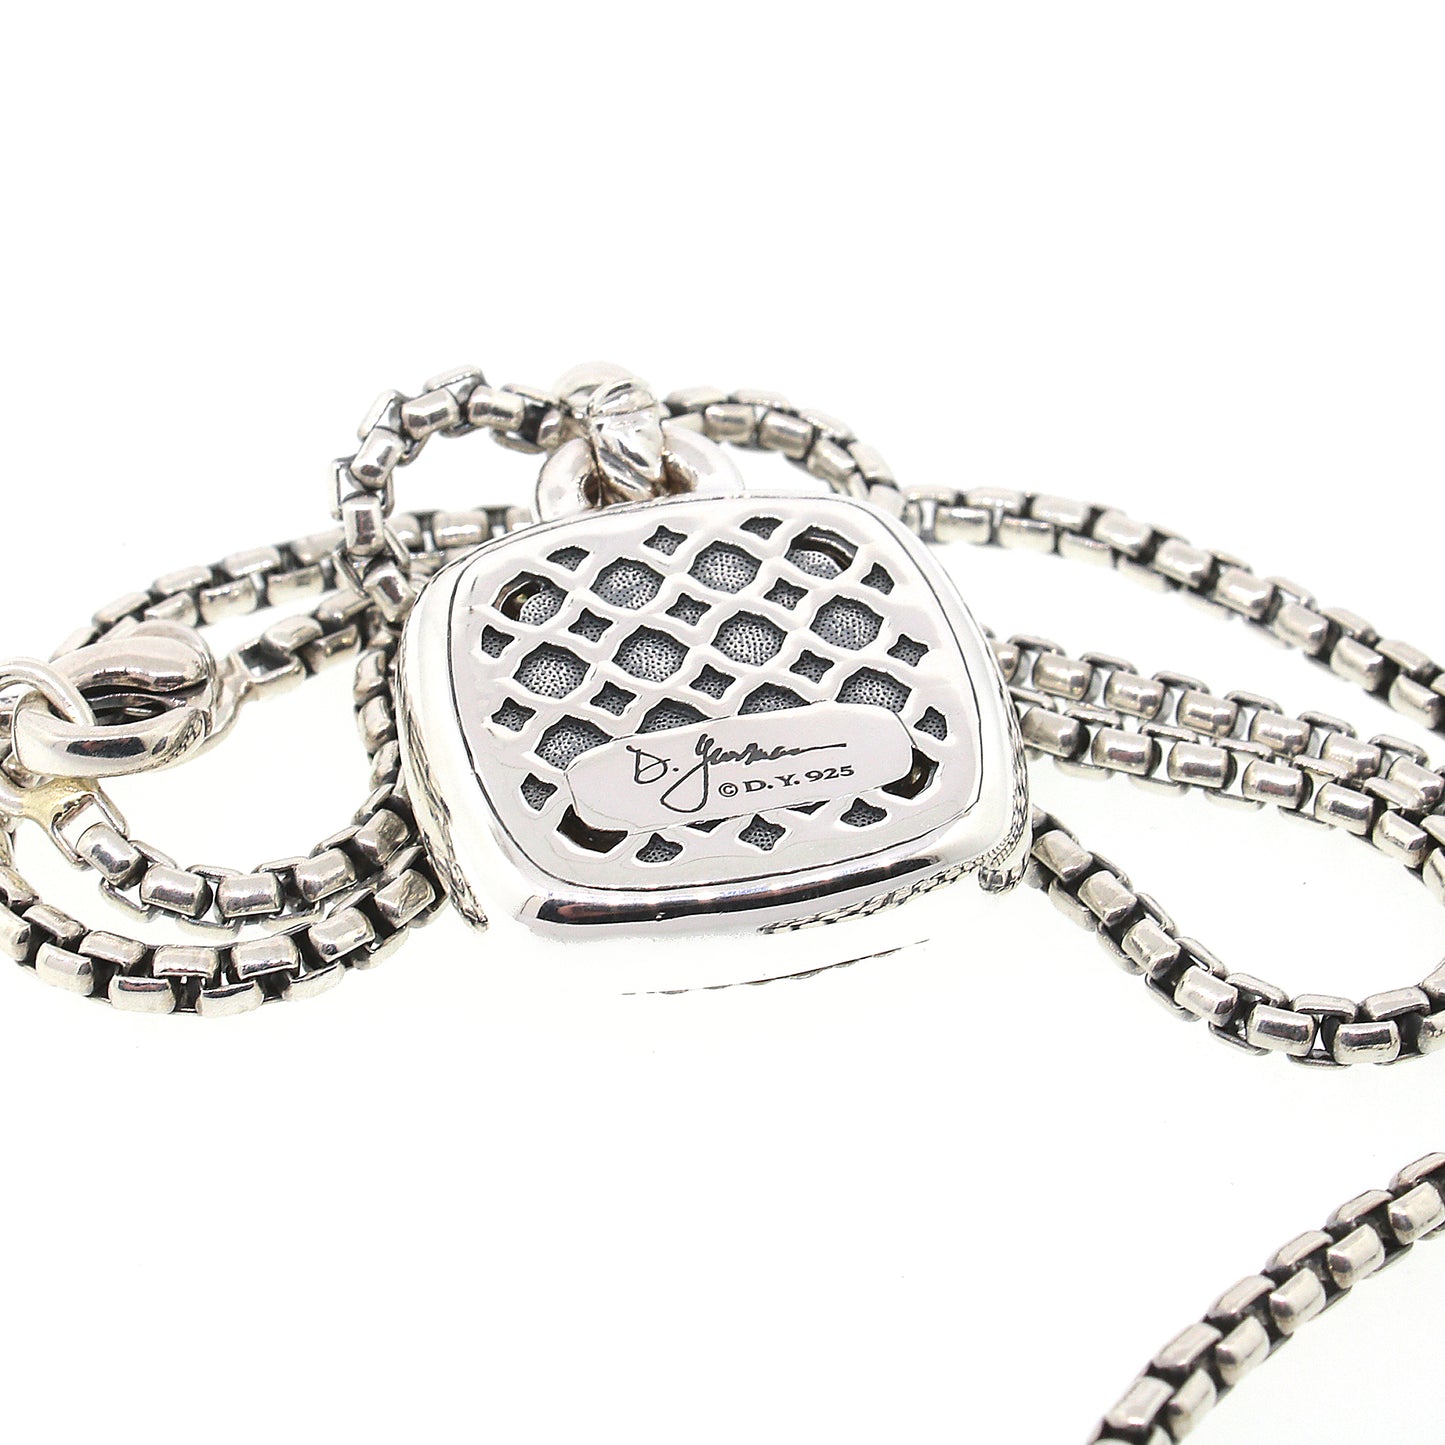 Load image into Gallery viewer, David Yurman Albion  Pendant with Pave Diamond Necklace
